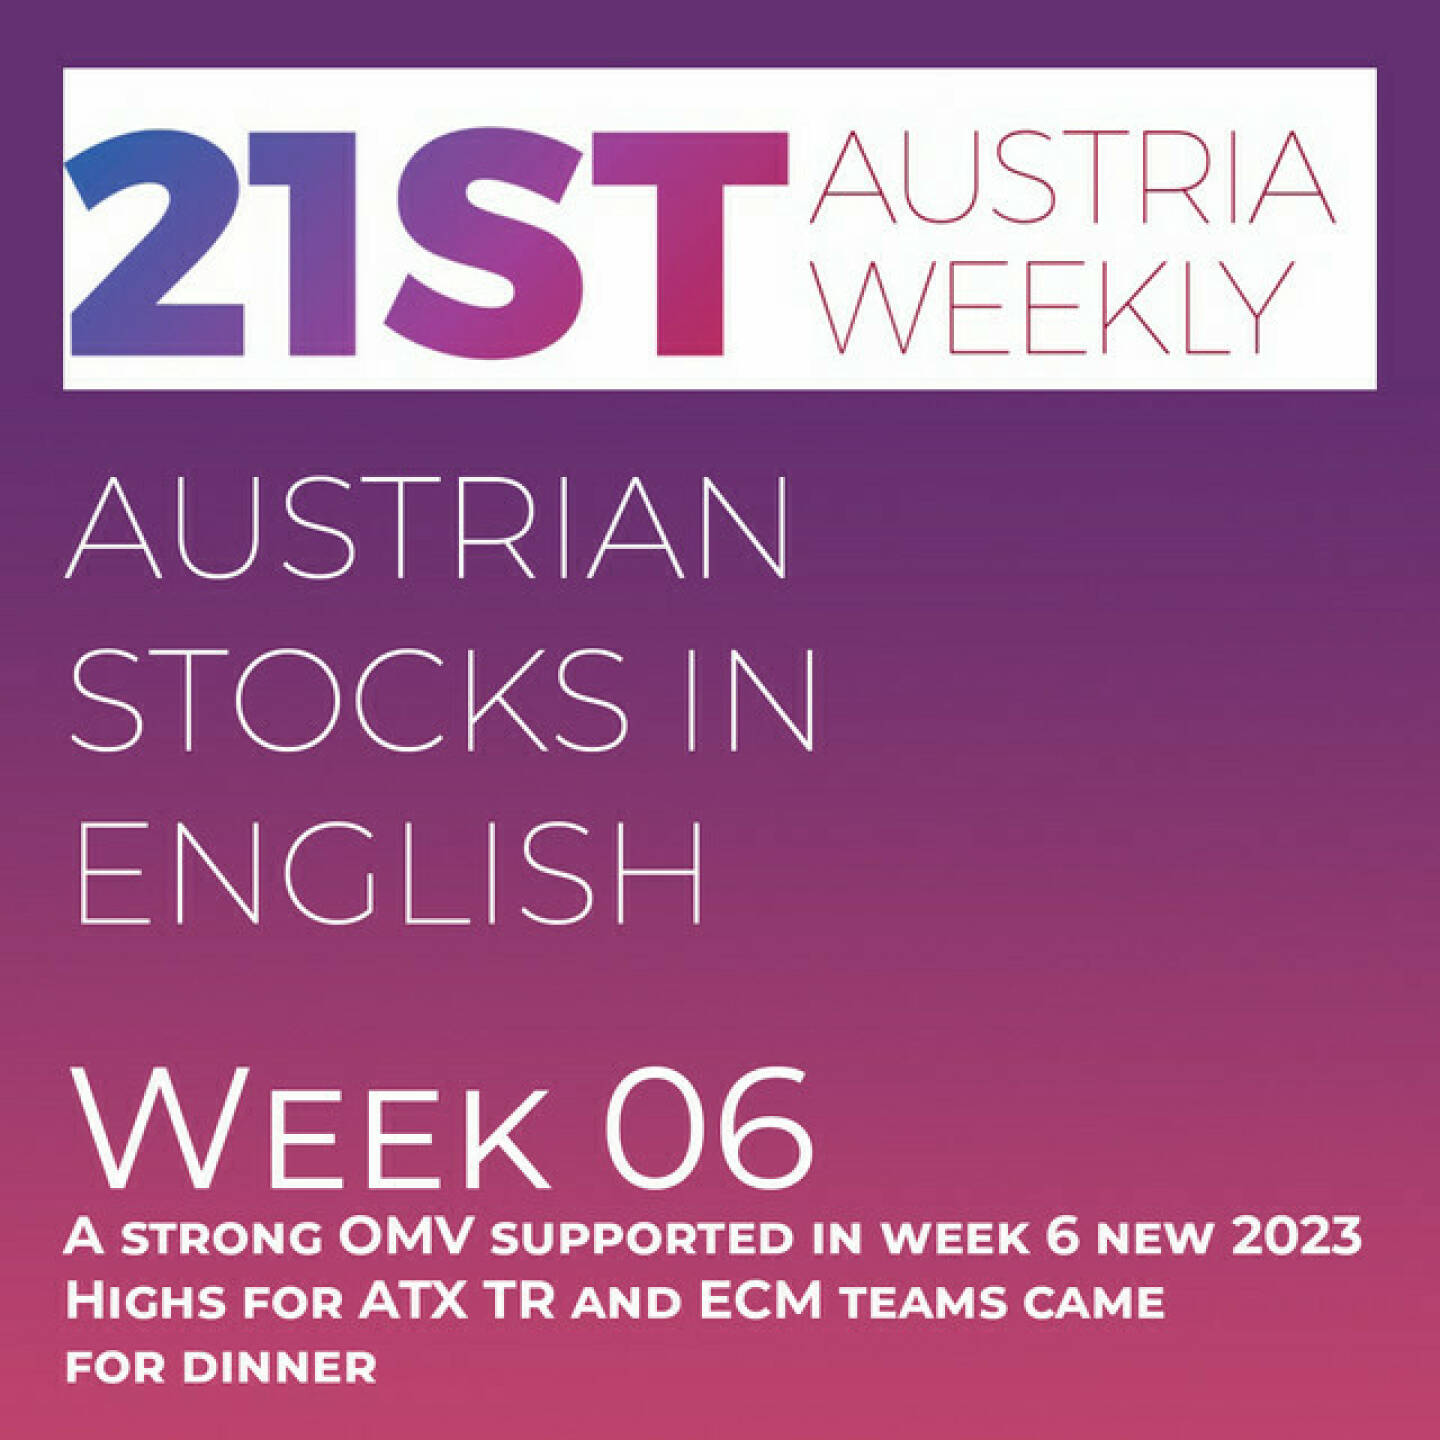 https://open.spotify.com/episode/5zyBDBlurtGuPkOrGsNXgj
Austrian Stocks in English: A strong OMV supported in week 6 new 2023 Highs for ATX TR and ECM teams came for dinner - <p>Welcome  to &#34;Austrian Stocks in English - presented by Palfinger&#34;, the english spoken weekly Summary for the Austrian Stock Market,  positioned every Sunday in the mostly german languaged Podcast &#34;Audio-CD.at Indie Podcasts&#34;- Wiener Börse, Sport Musik und Mehr“ .<br/><br/>This script is based on our 21st Austria weekly and Week 6 brought - supported by a very strong OMV - new highs for 2023. ATX TR climbed 1,96% to 7.270,84 points. <br/><br/>Vienna Stock Exchange celebrated with ECM teams from all over Europe, invited them for dinner and personal exchange, a cherished tradition. ABN AMRO Bank N.V., Alantra, Baader Bank AG, Berenberg, BNP Paribas, Citi, Commerzbank AG, Erste Group ,Goldman Sachs, Jefferies J.P. Morgan Lilja &amp; Co. NuWays AG, Raiffeisen Bank International AG,Societe Generale, STJ Advisors Stifel, Financial Corp., UniCredit and Wiener Privatbank were joining.<br/><br/>News came from Wolftank, ams Osram, voestalpine, Verbund, Agrana and Vienna Airport, spoken by the absolutely smart Allison.<br/><br/>Please rate my Podcast on Apple Podcasts (or Spotify): <a href=https://podcasts.apple.com/at/podcast/audio-cd-at-indie-podcasts-wiener-börse-sport-musik-und-mehr/id1484919130 target=_blank>https://podcasts.apple.com/at/podcast/audio-cd-at-indie-podcasts-wiener-börse-sport-musik-und-mehr/id1484919130</a> .And please spread the word : <a href=https://www.boerse-social.com/21staustria target=_blank>https://www.boerse-social.com/21staustria</a> - the address to subscribe to the weekly summary as a PDF.</p>